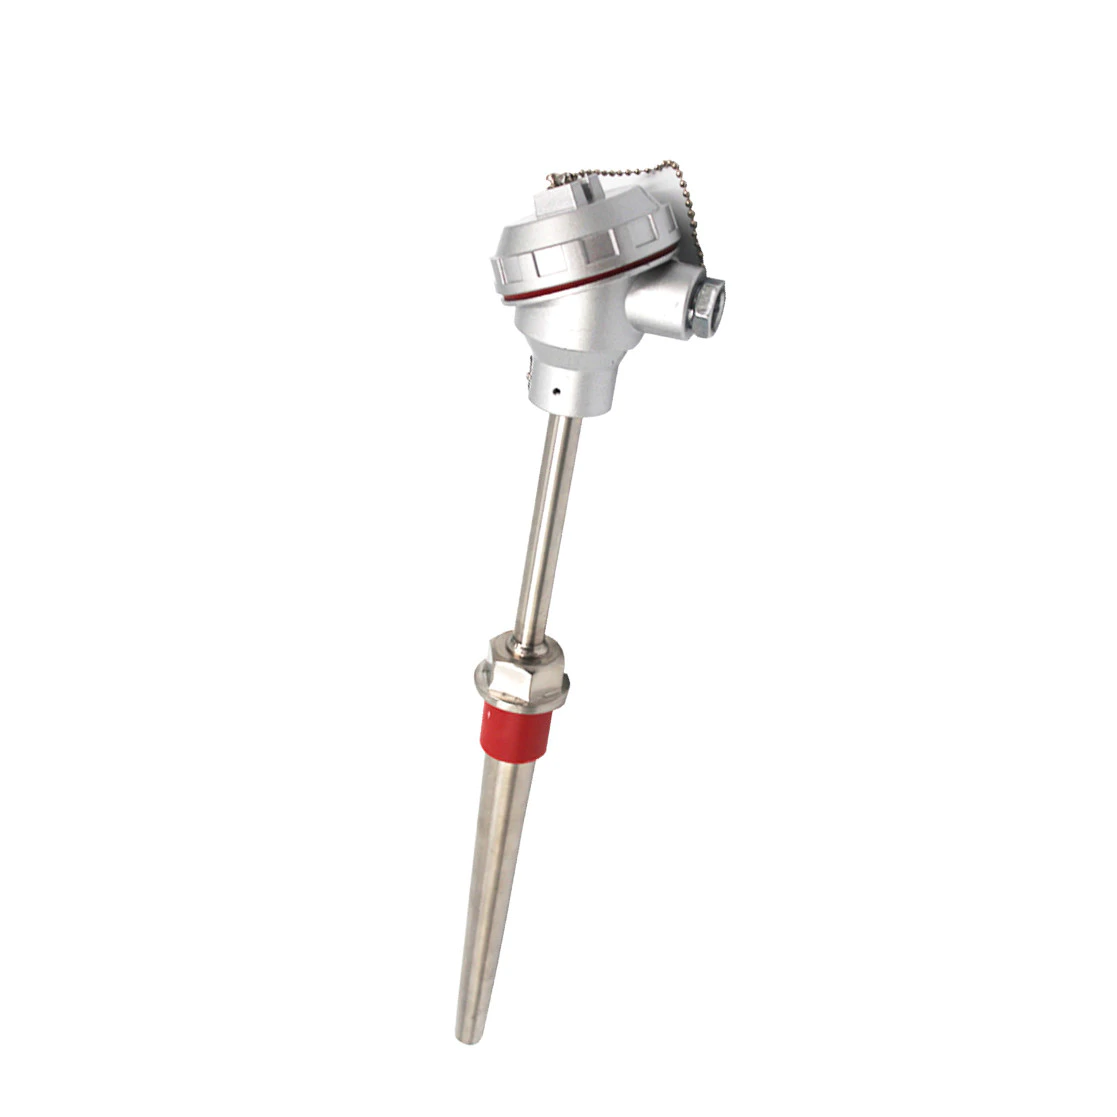 industrial leading thermocouple manufacturer manufacturer for temperature compensation